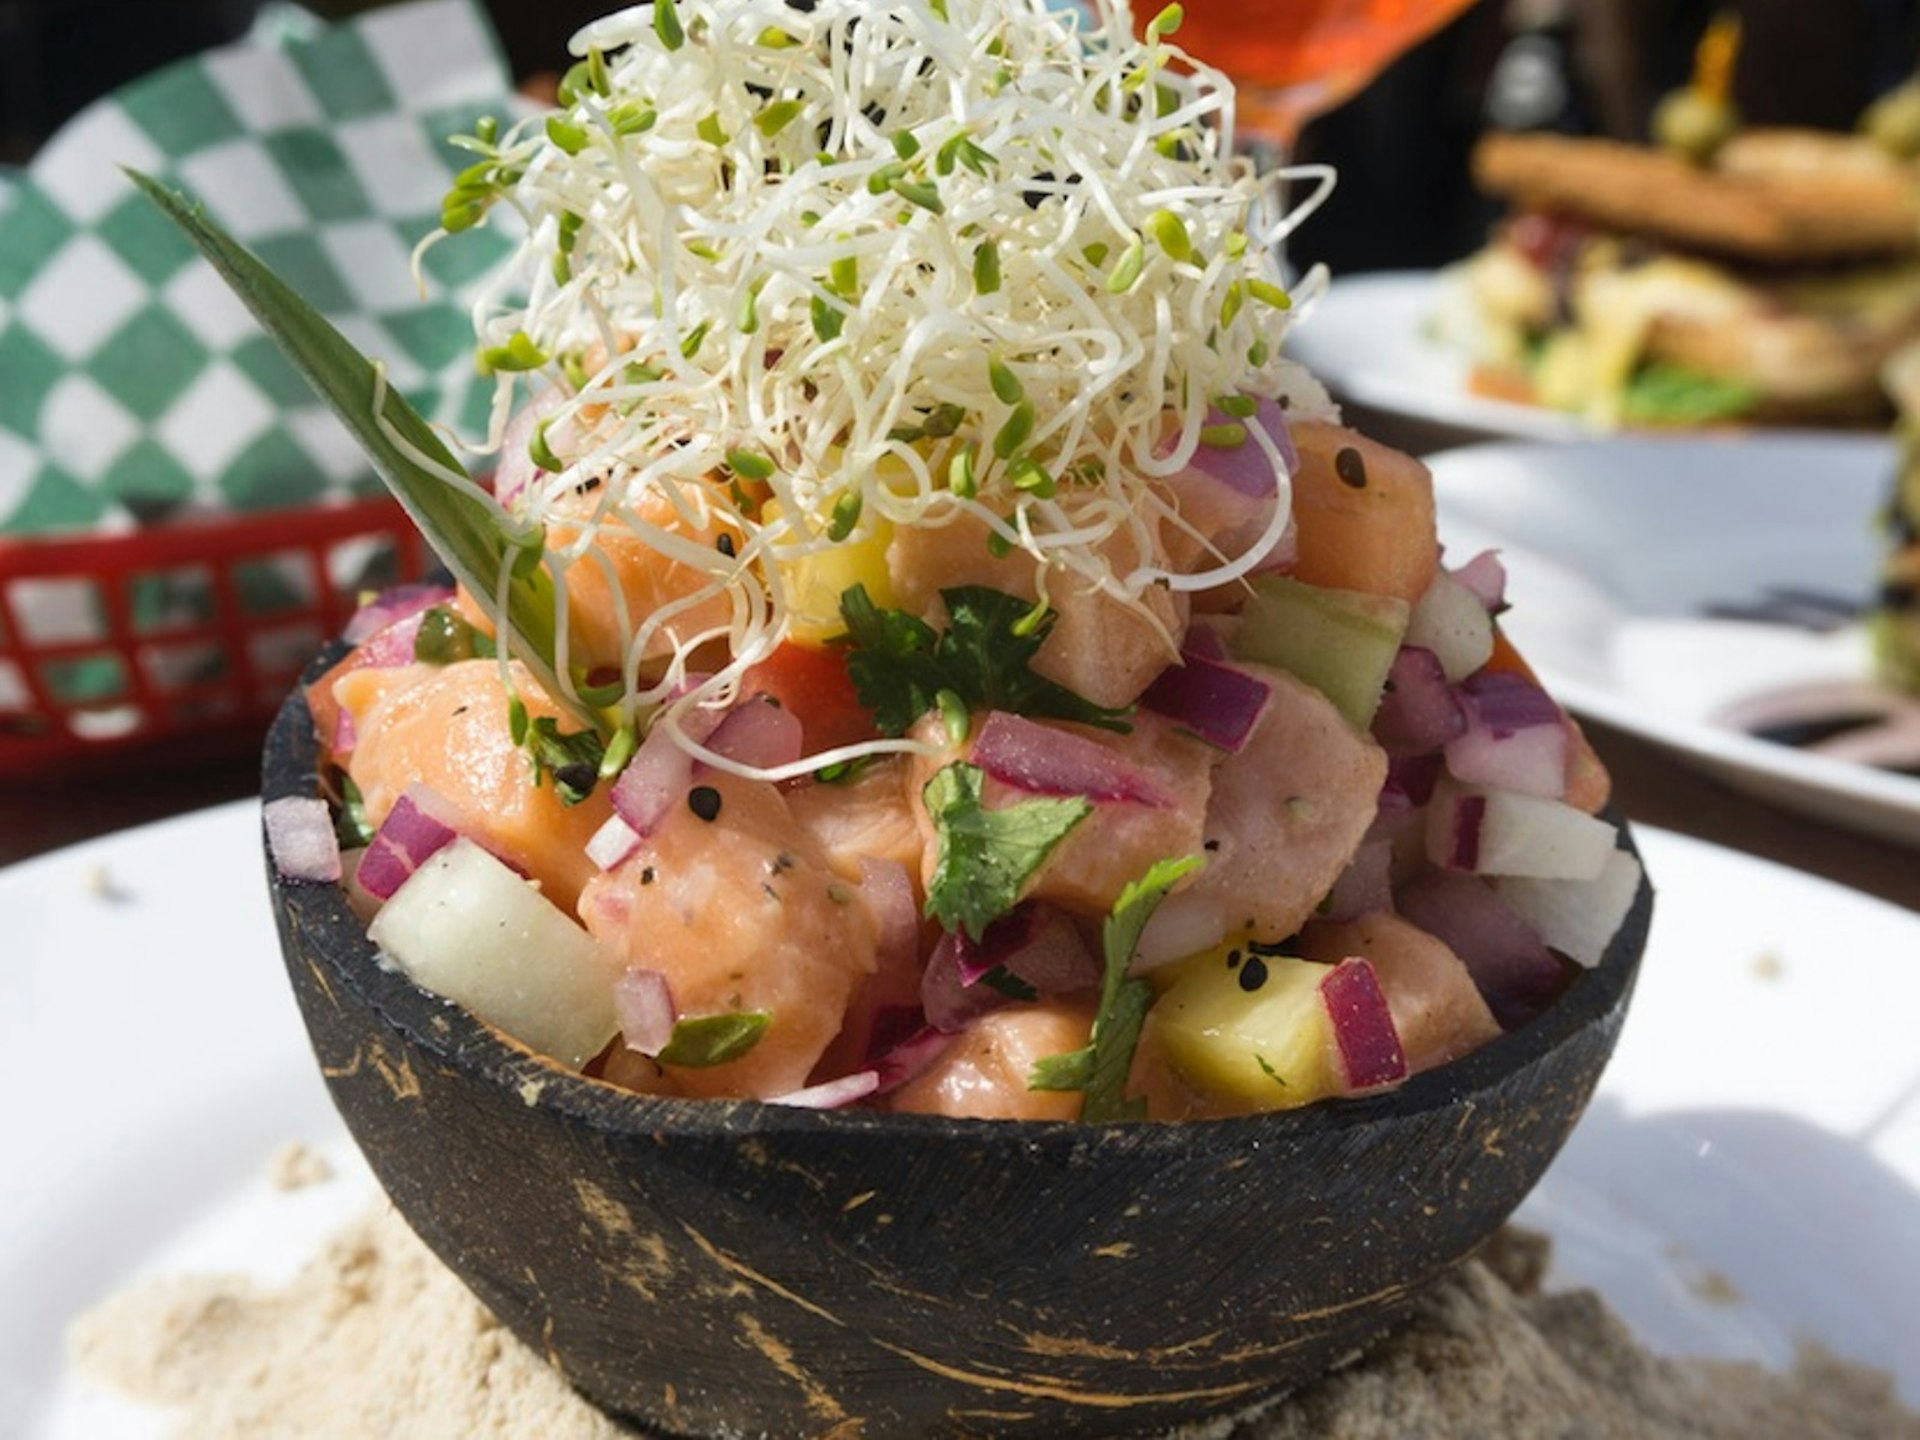 A bowl of ceviche served on the beach in Mexico